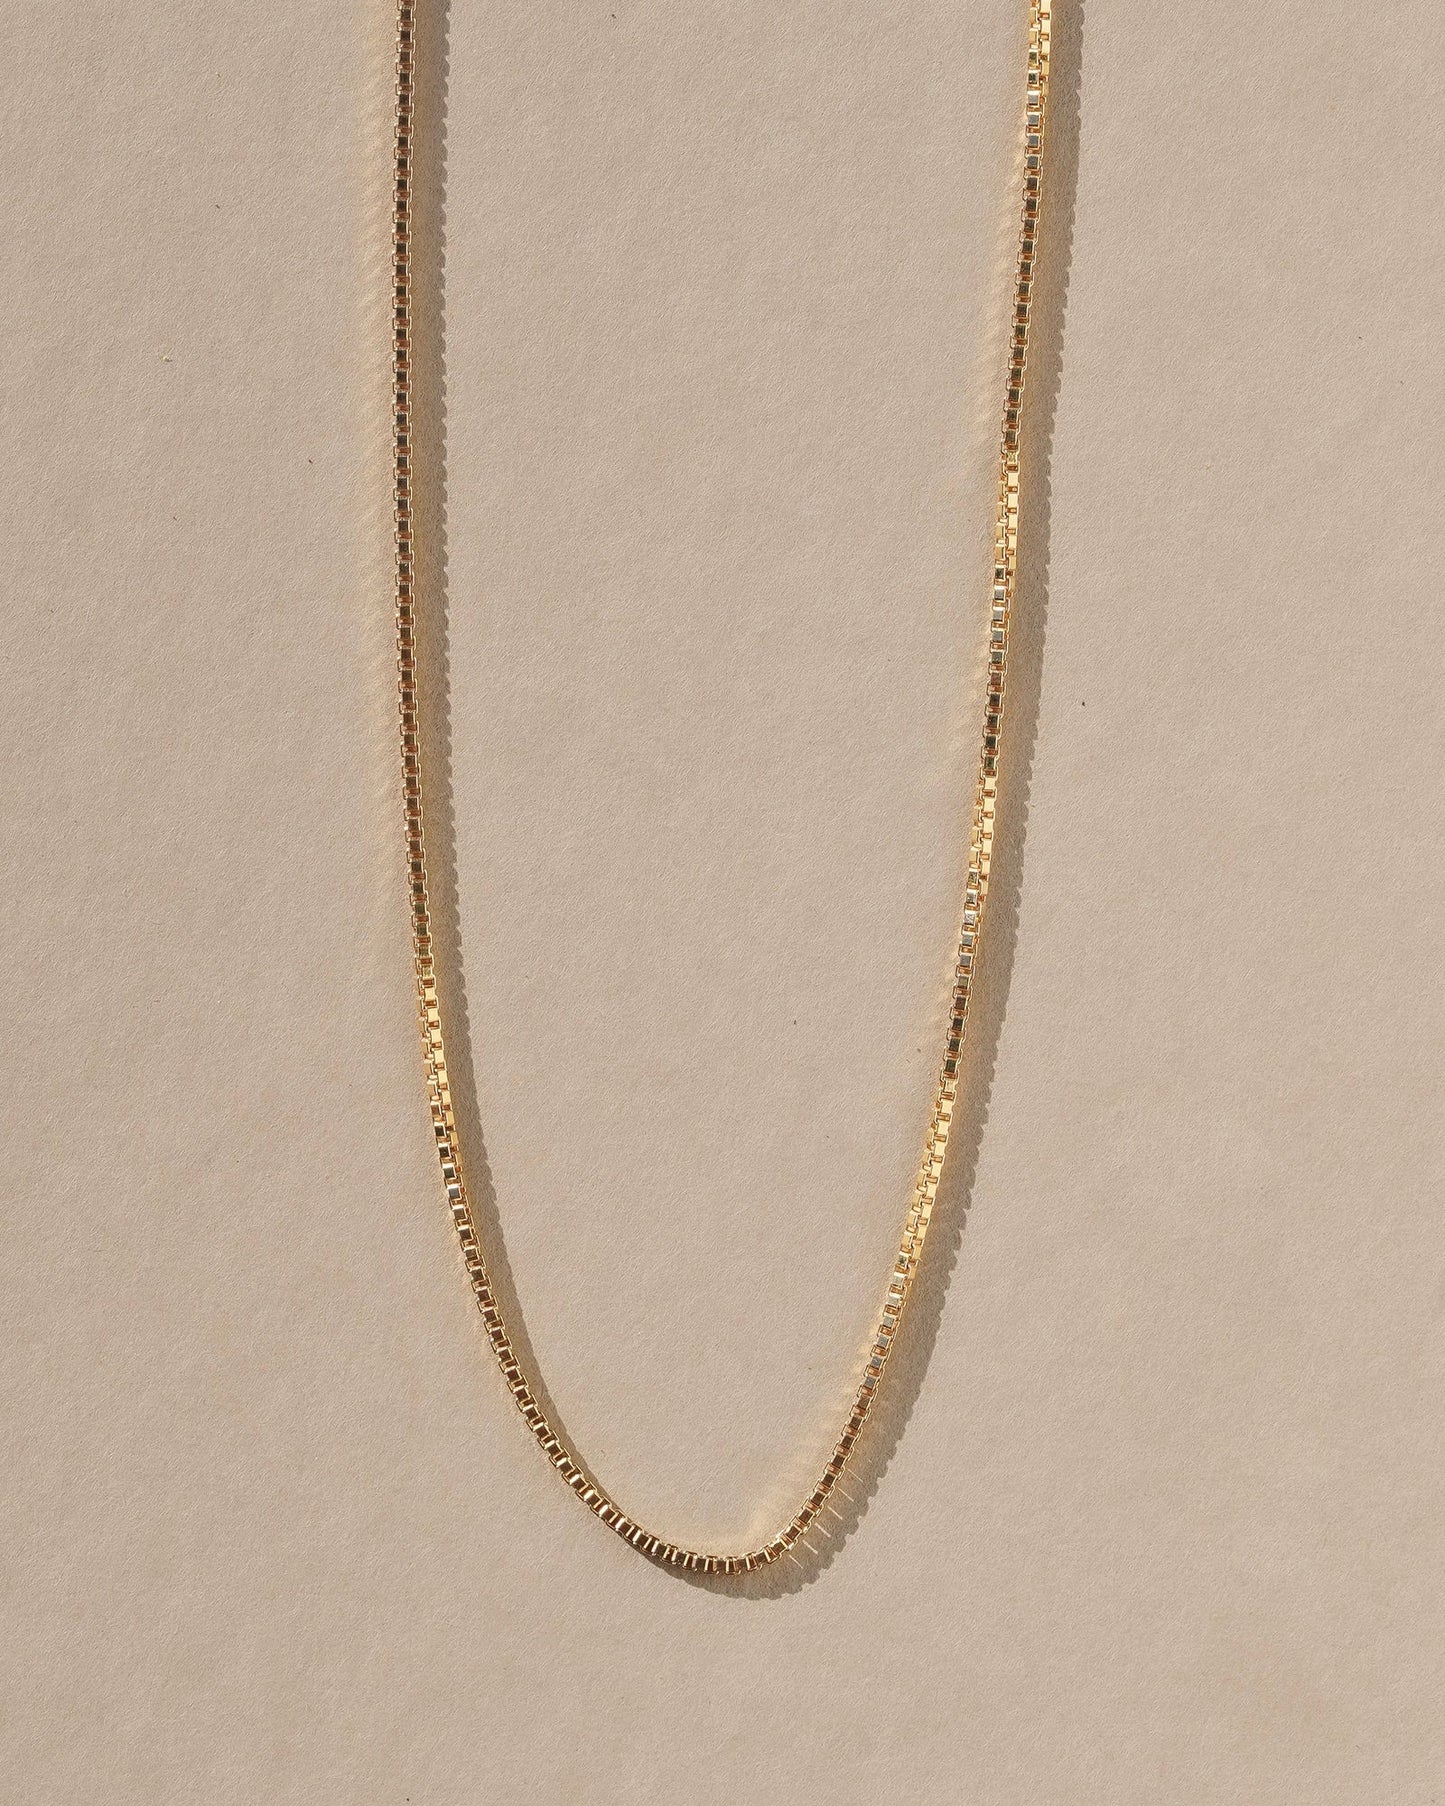 A delicate light weight classic box chain that’s light as air and catches the light just right, perfect for layering or adding a favorite pendant. Handmade in the Santa Cruz Mountains.